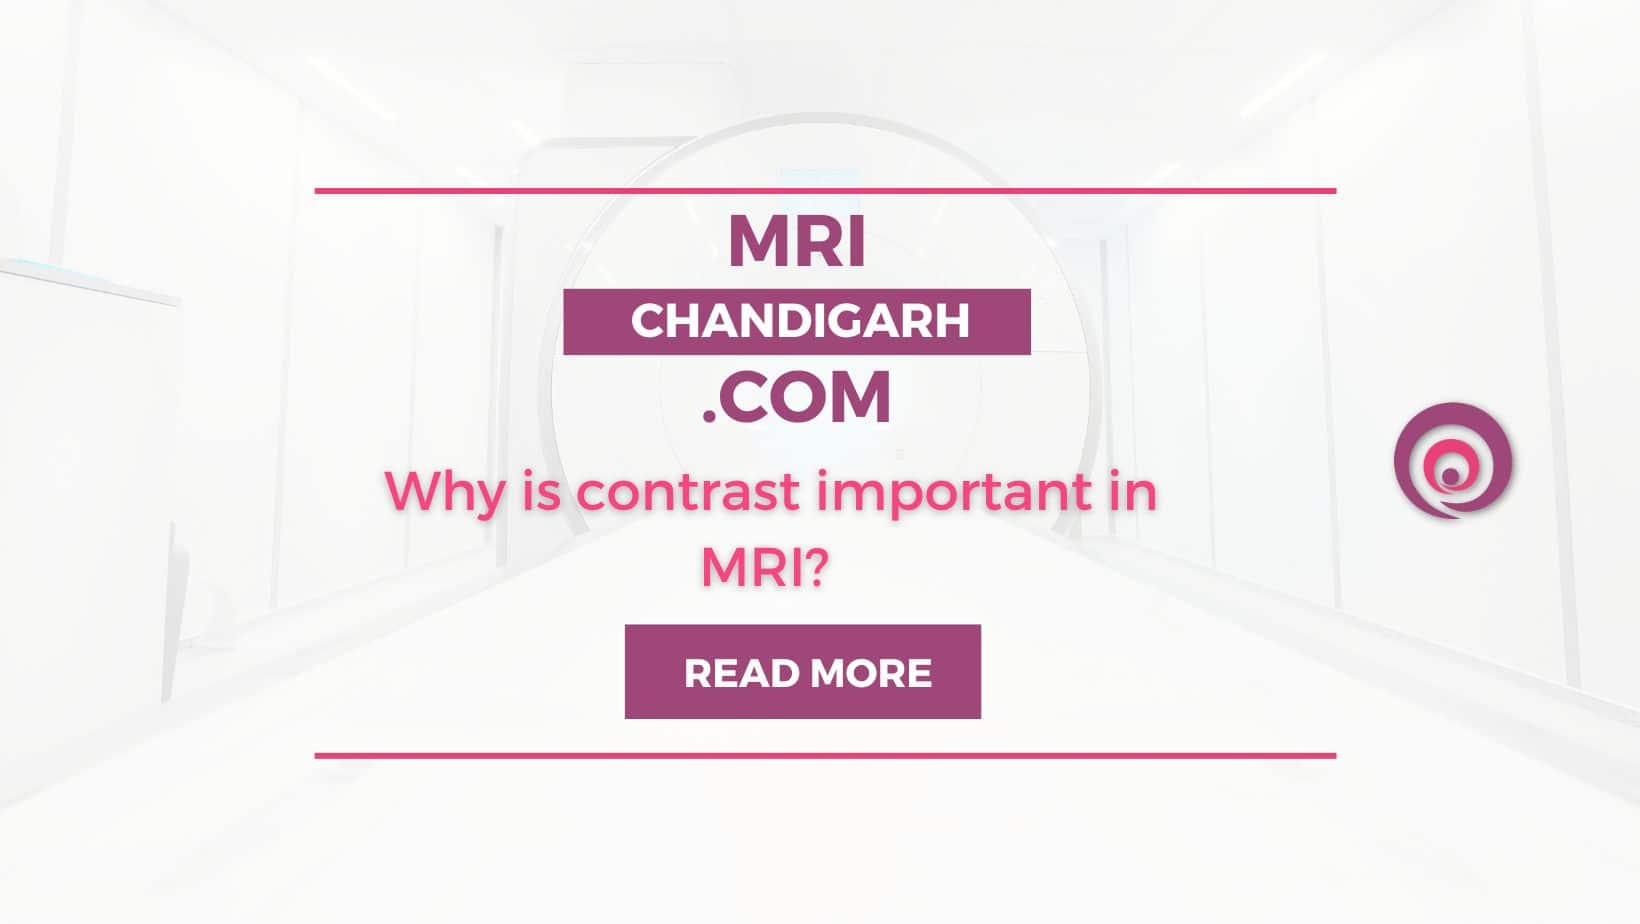 Why is contrast important in MRI?